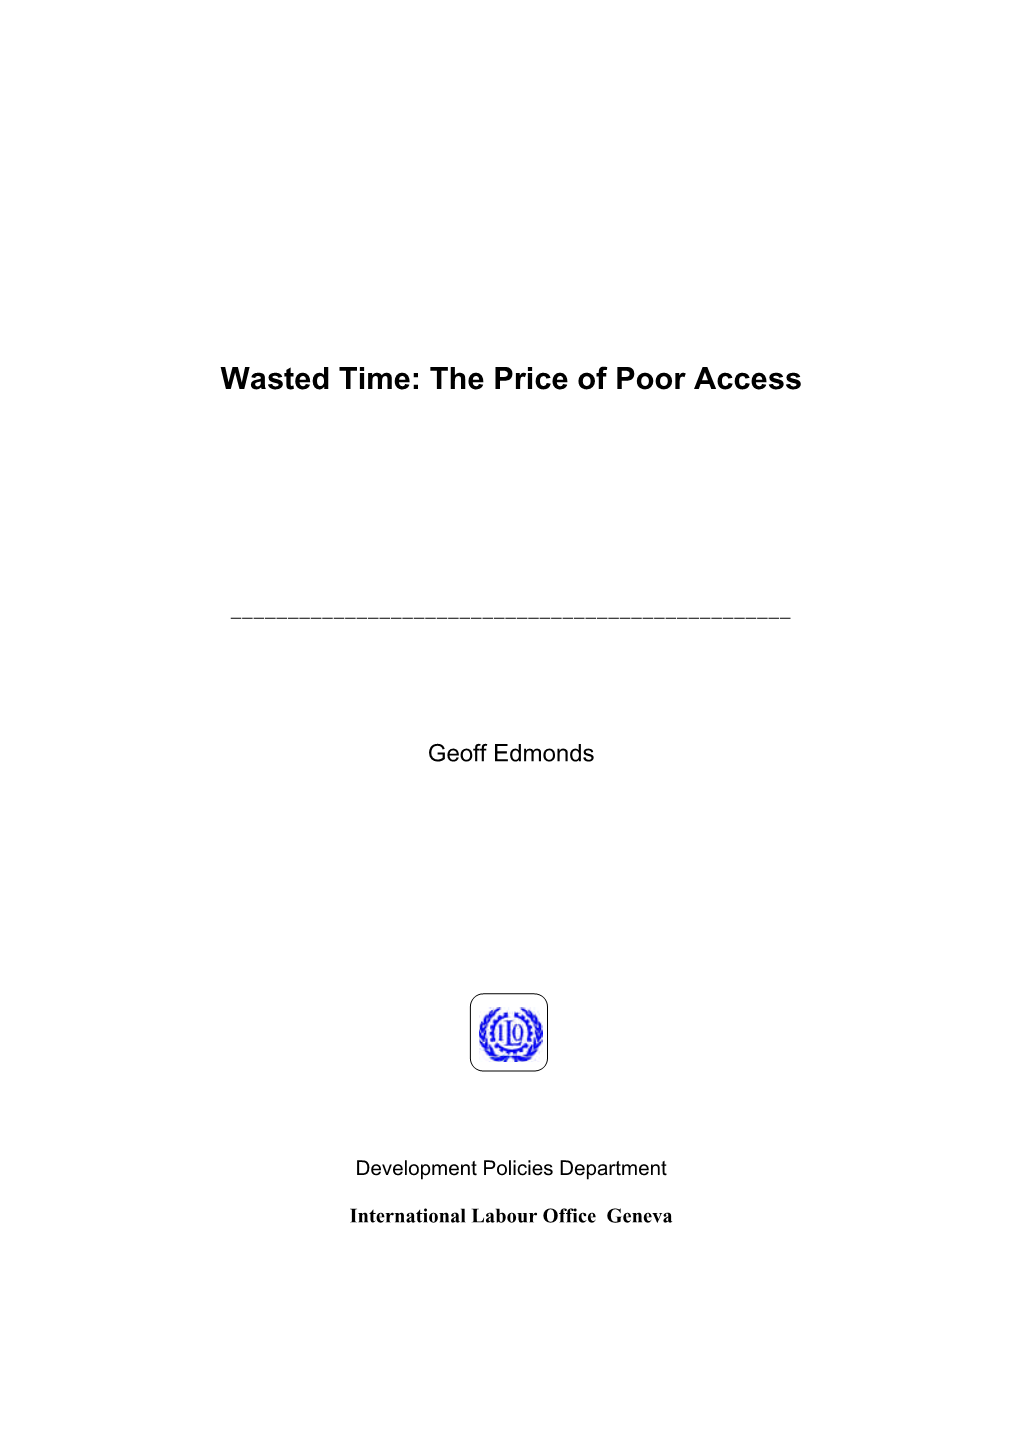 Wasted Time: the Price of Poor Access